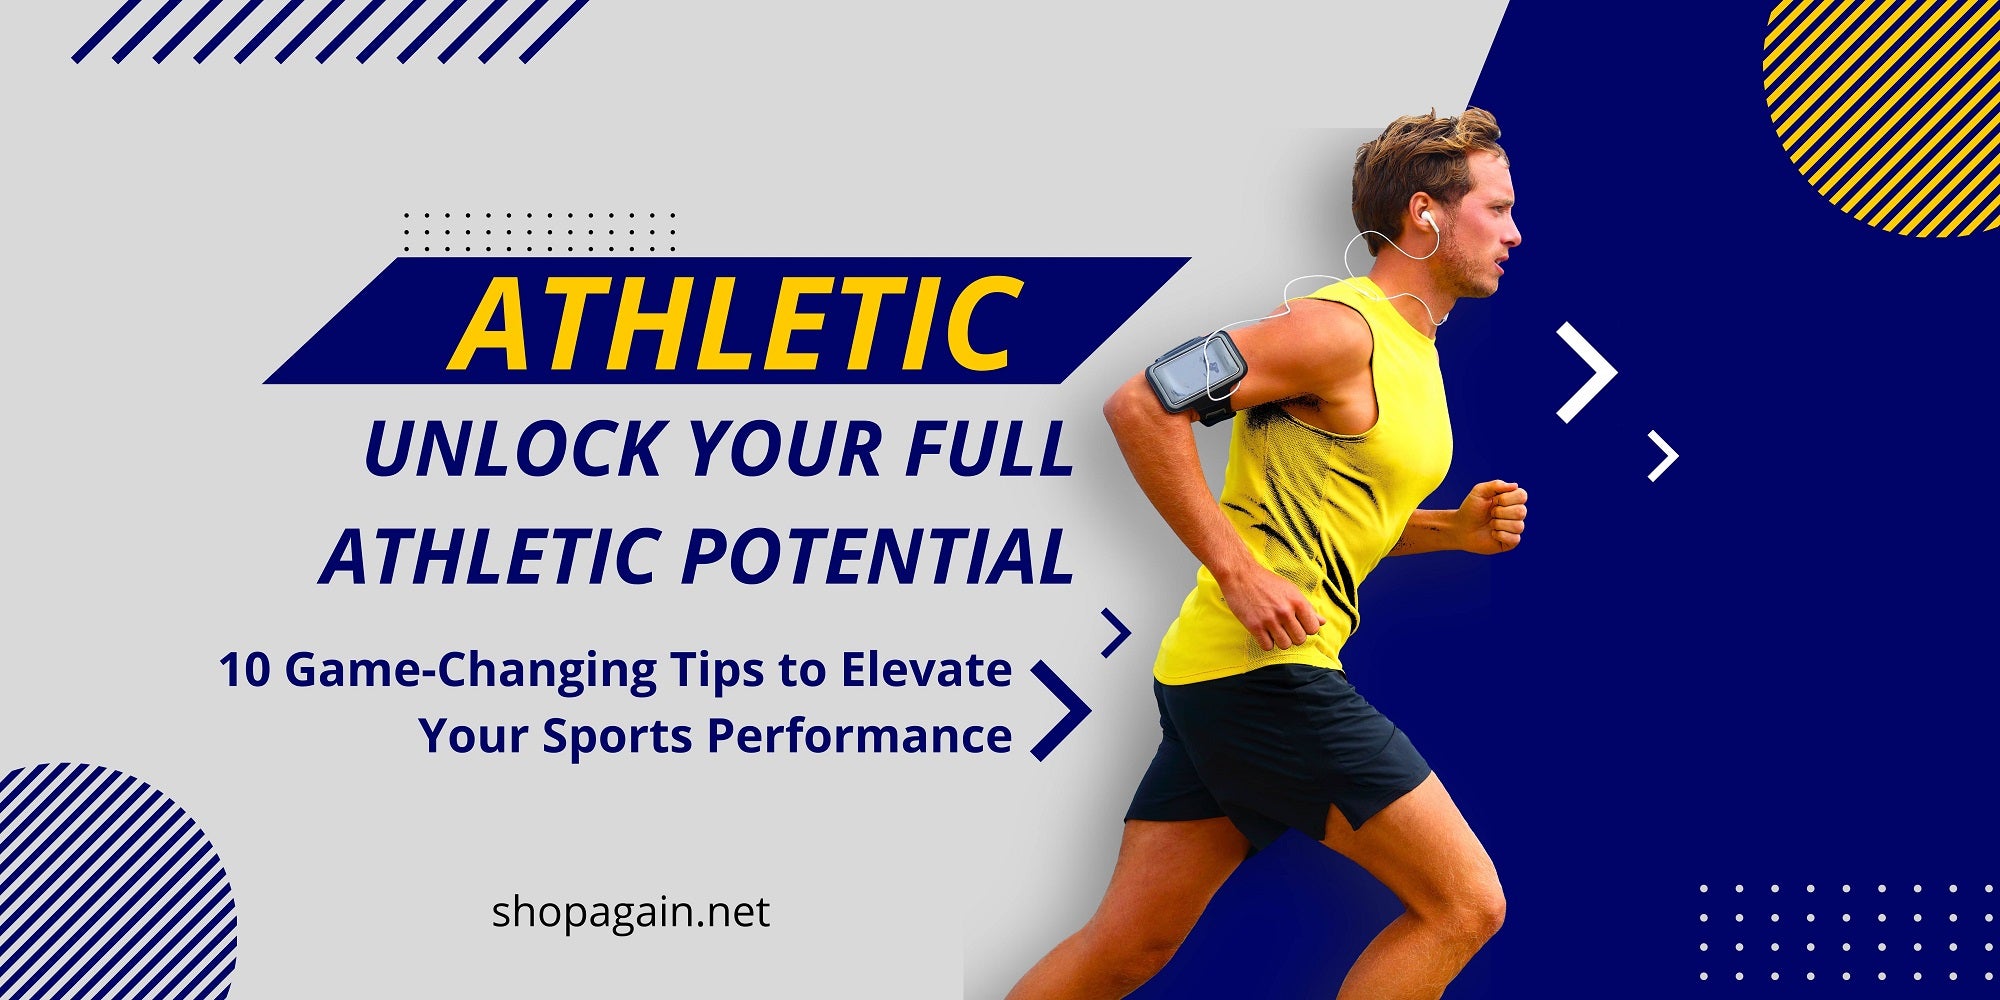 Unlock Your Full Athletic Potential: 10 Game-Changing Tips to Elevate Your Sports Performance